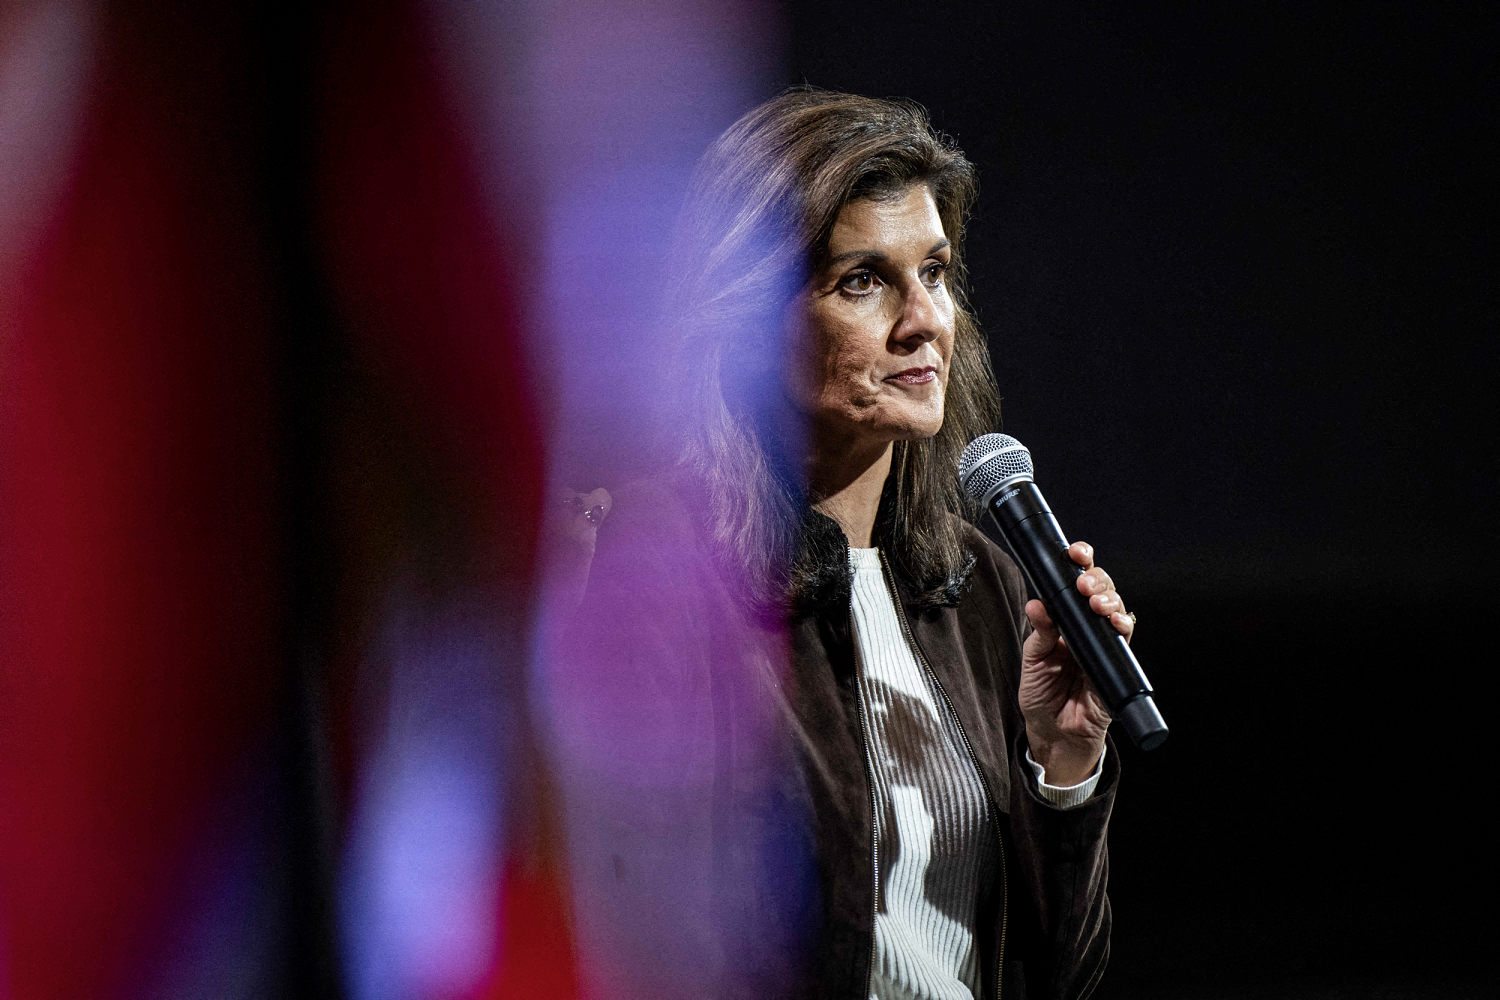 Nikki Haley exits the stage, ending the primary race about nothing